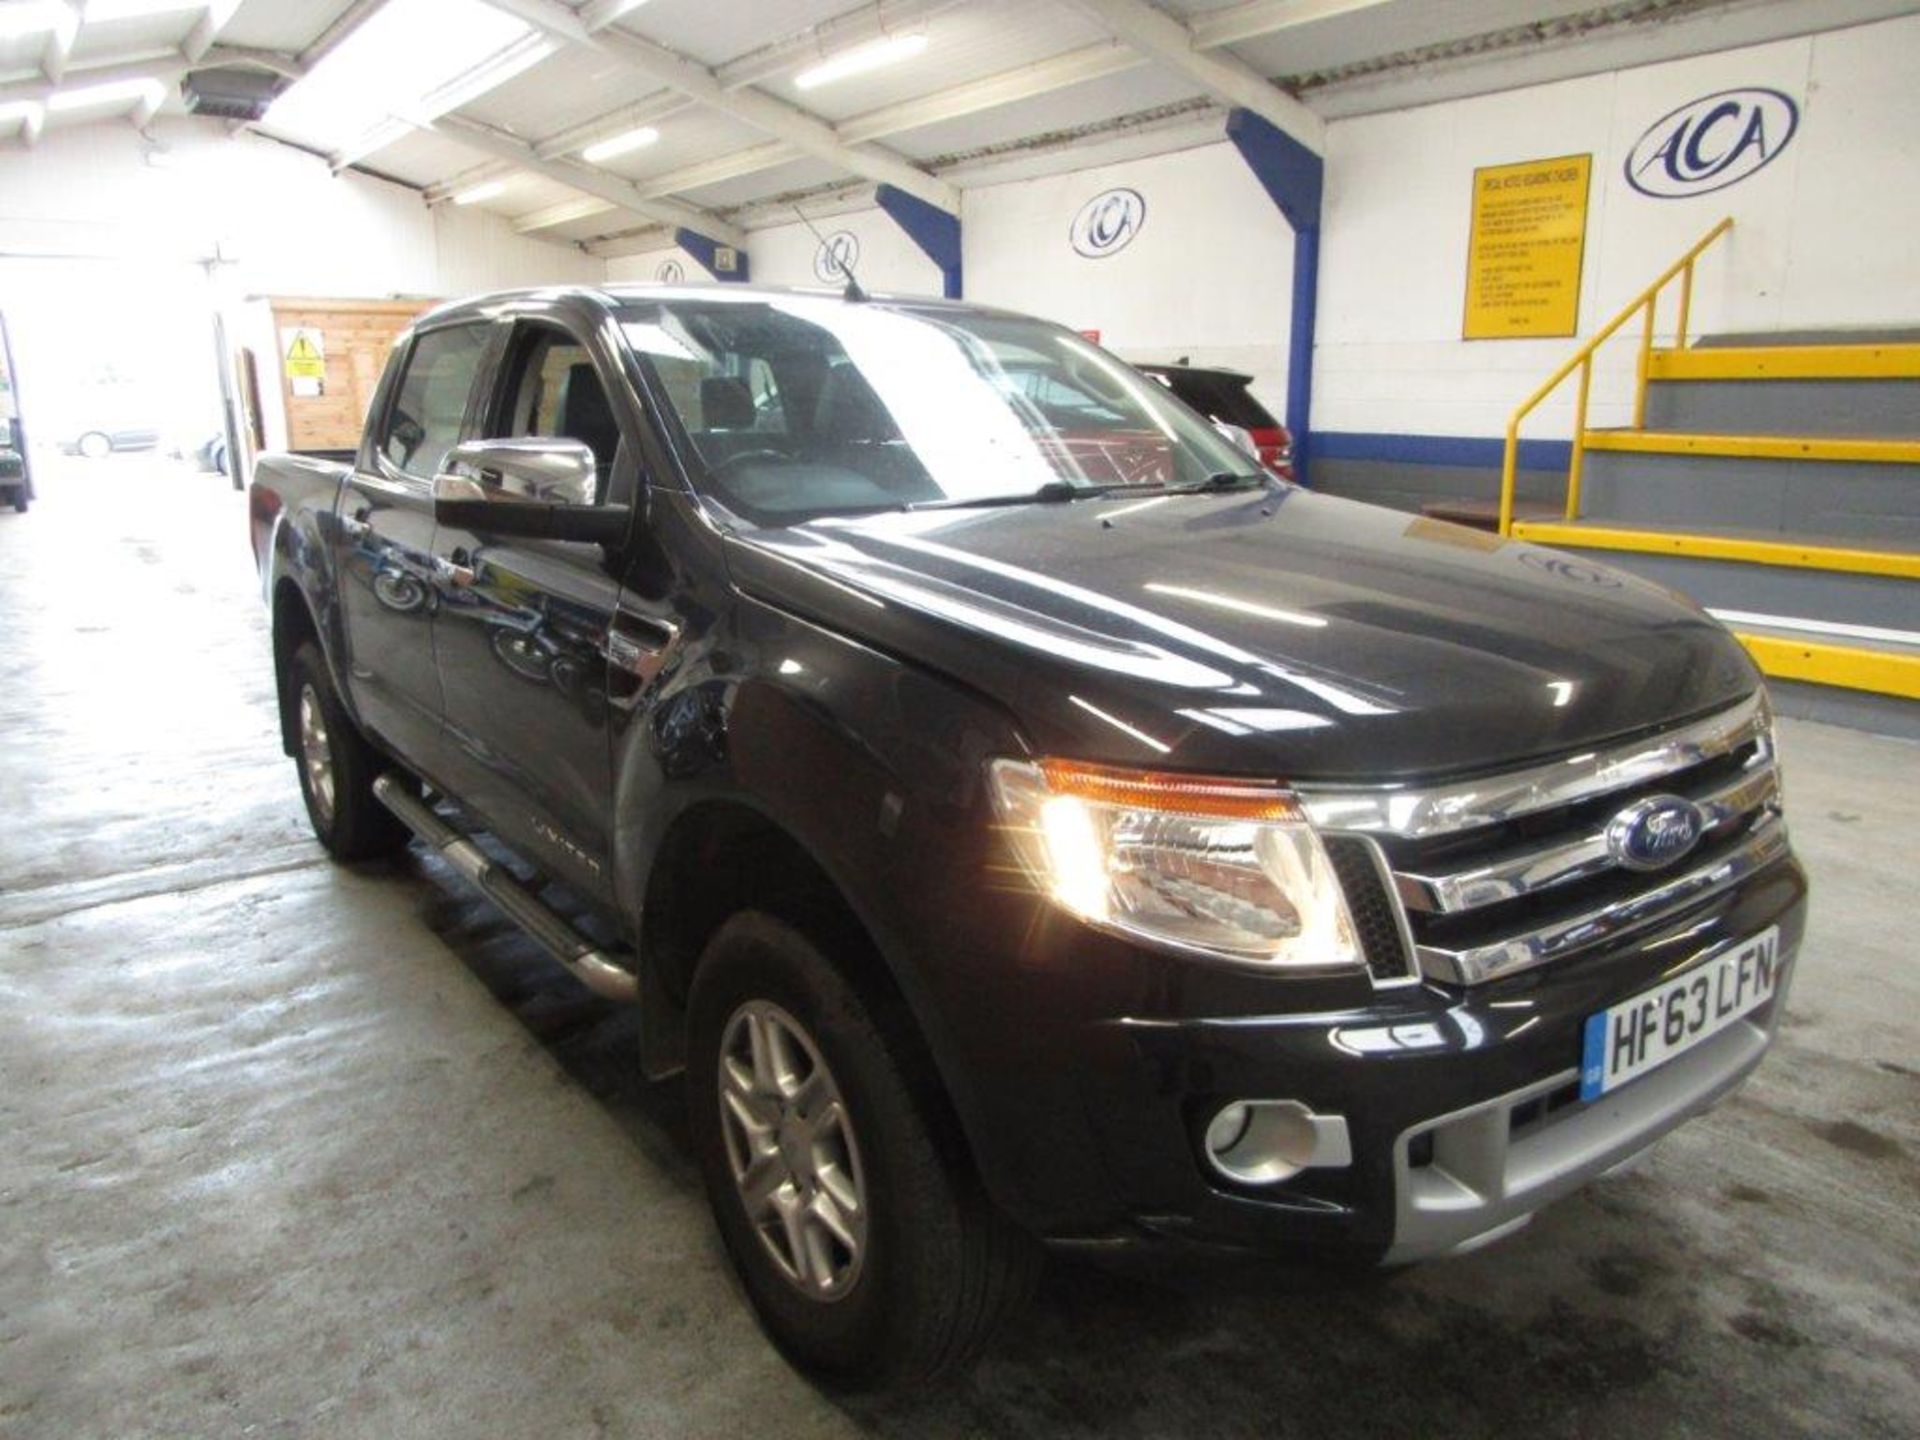 63 13 Ford Ranger Limited 4X4 TDCI - Image 2 of 16